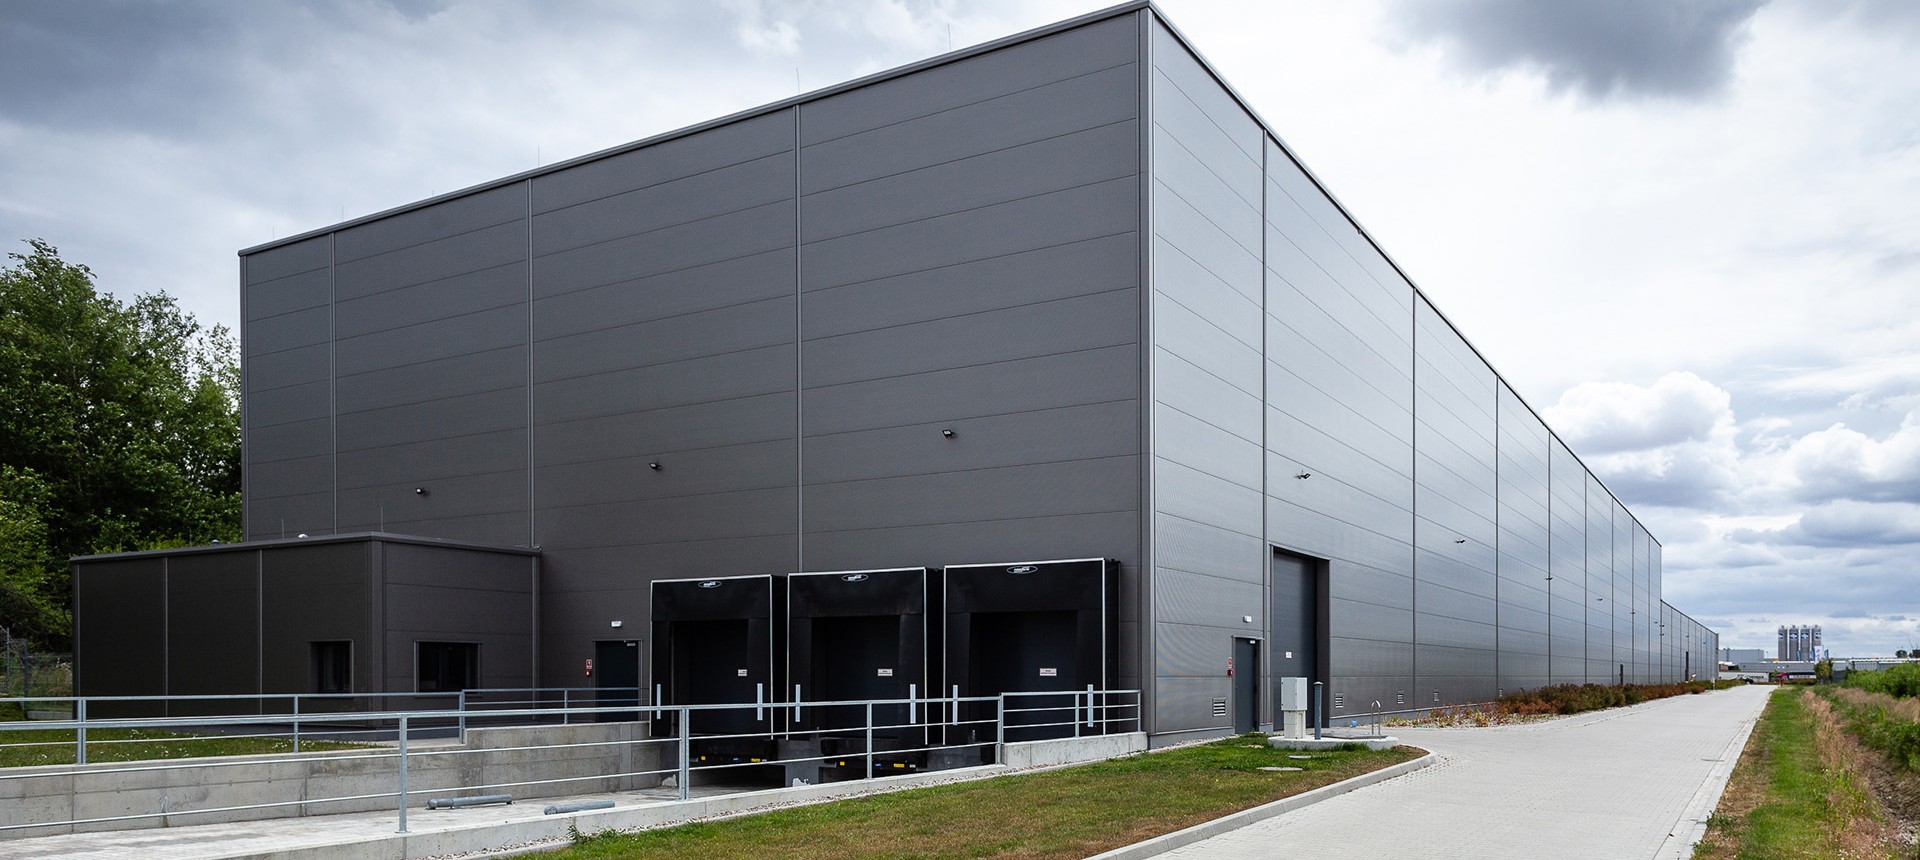 OPENING A LOGISTICS CENTRE WITH A 8000 M2 WAREHOUSE